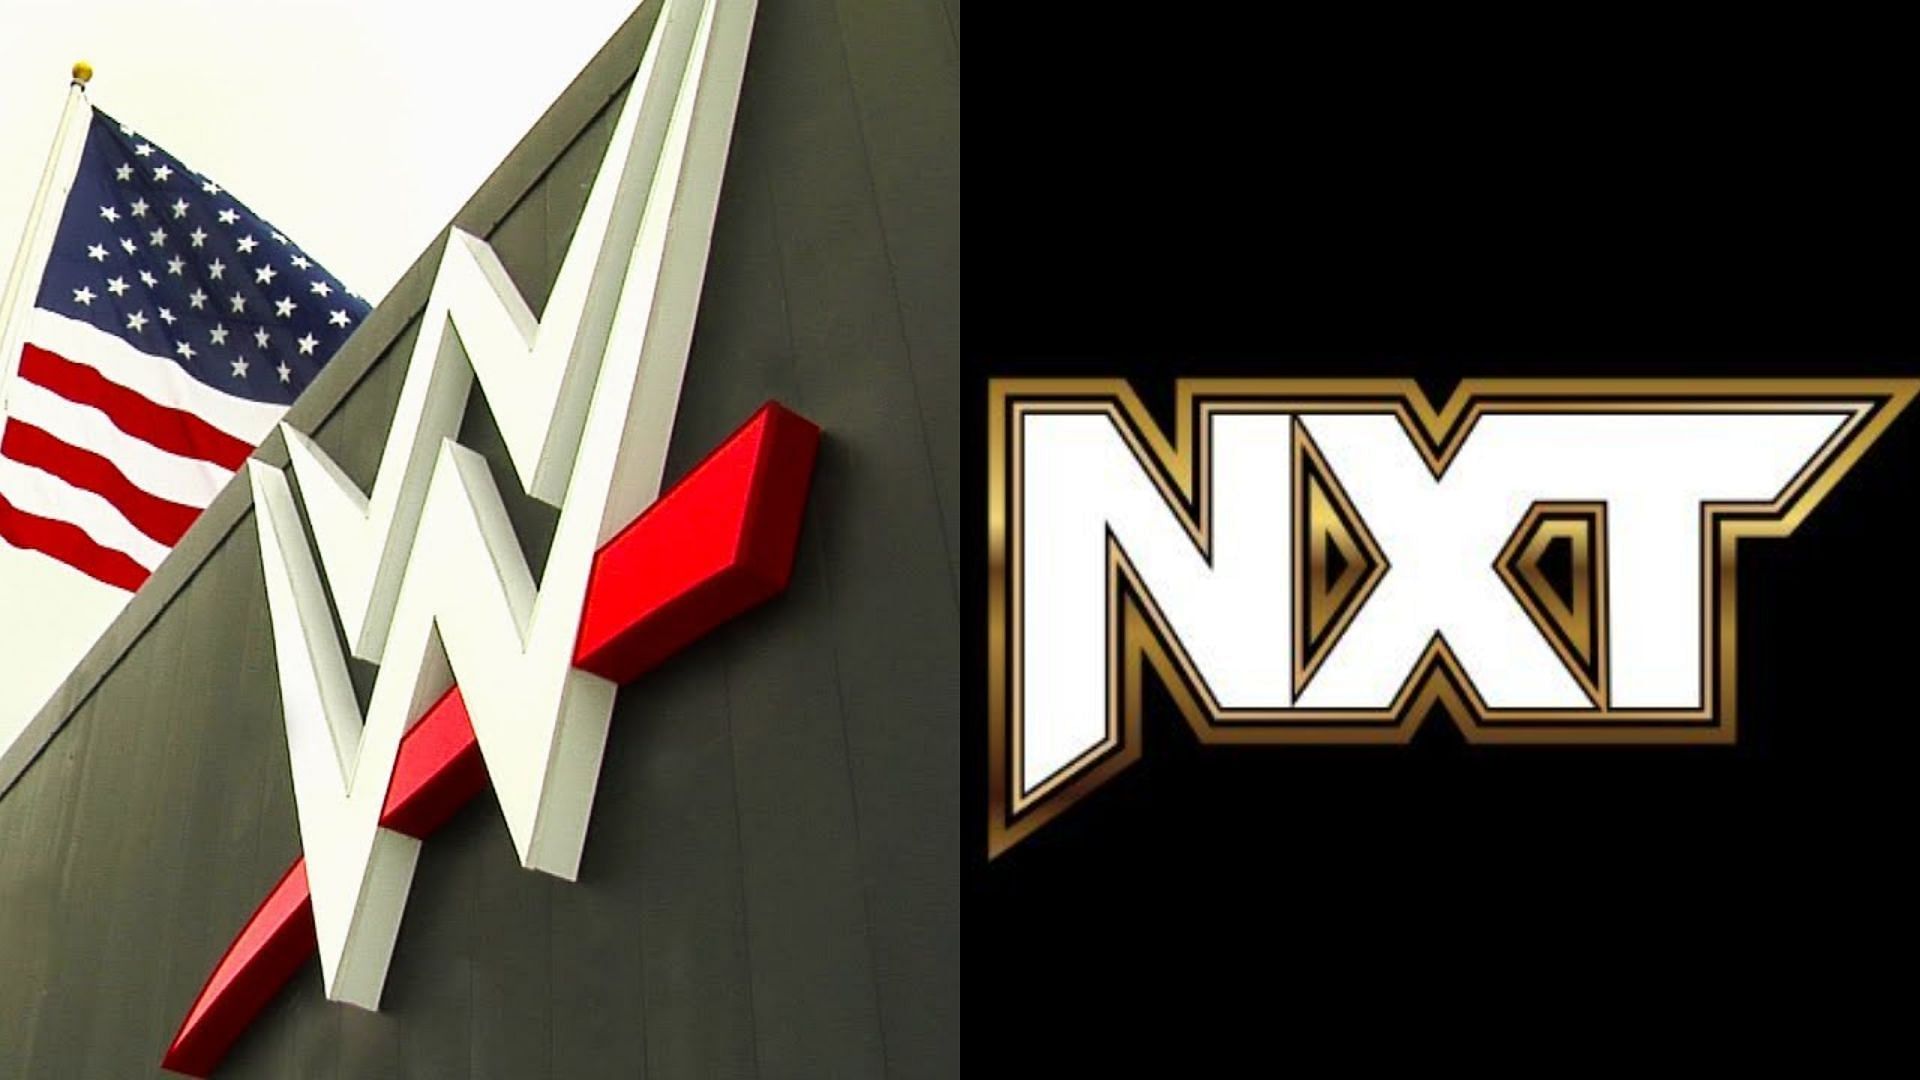 NXT is the development brand of WWE